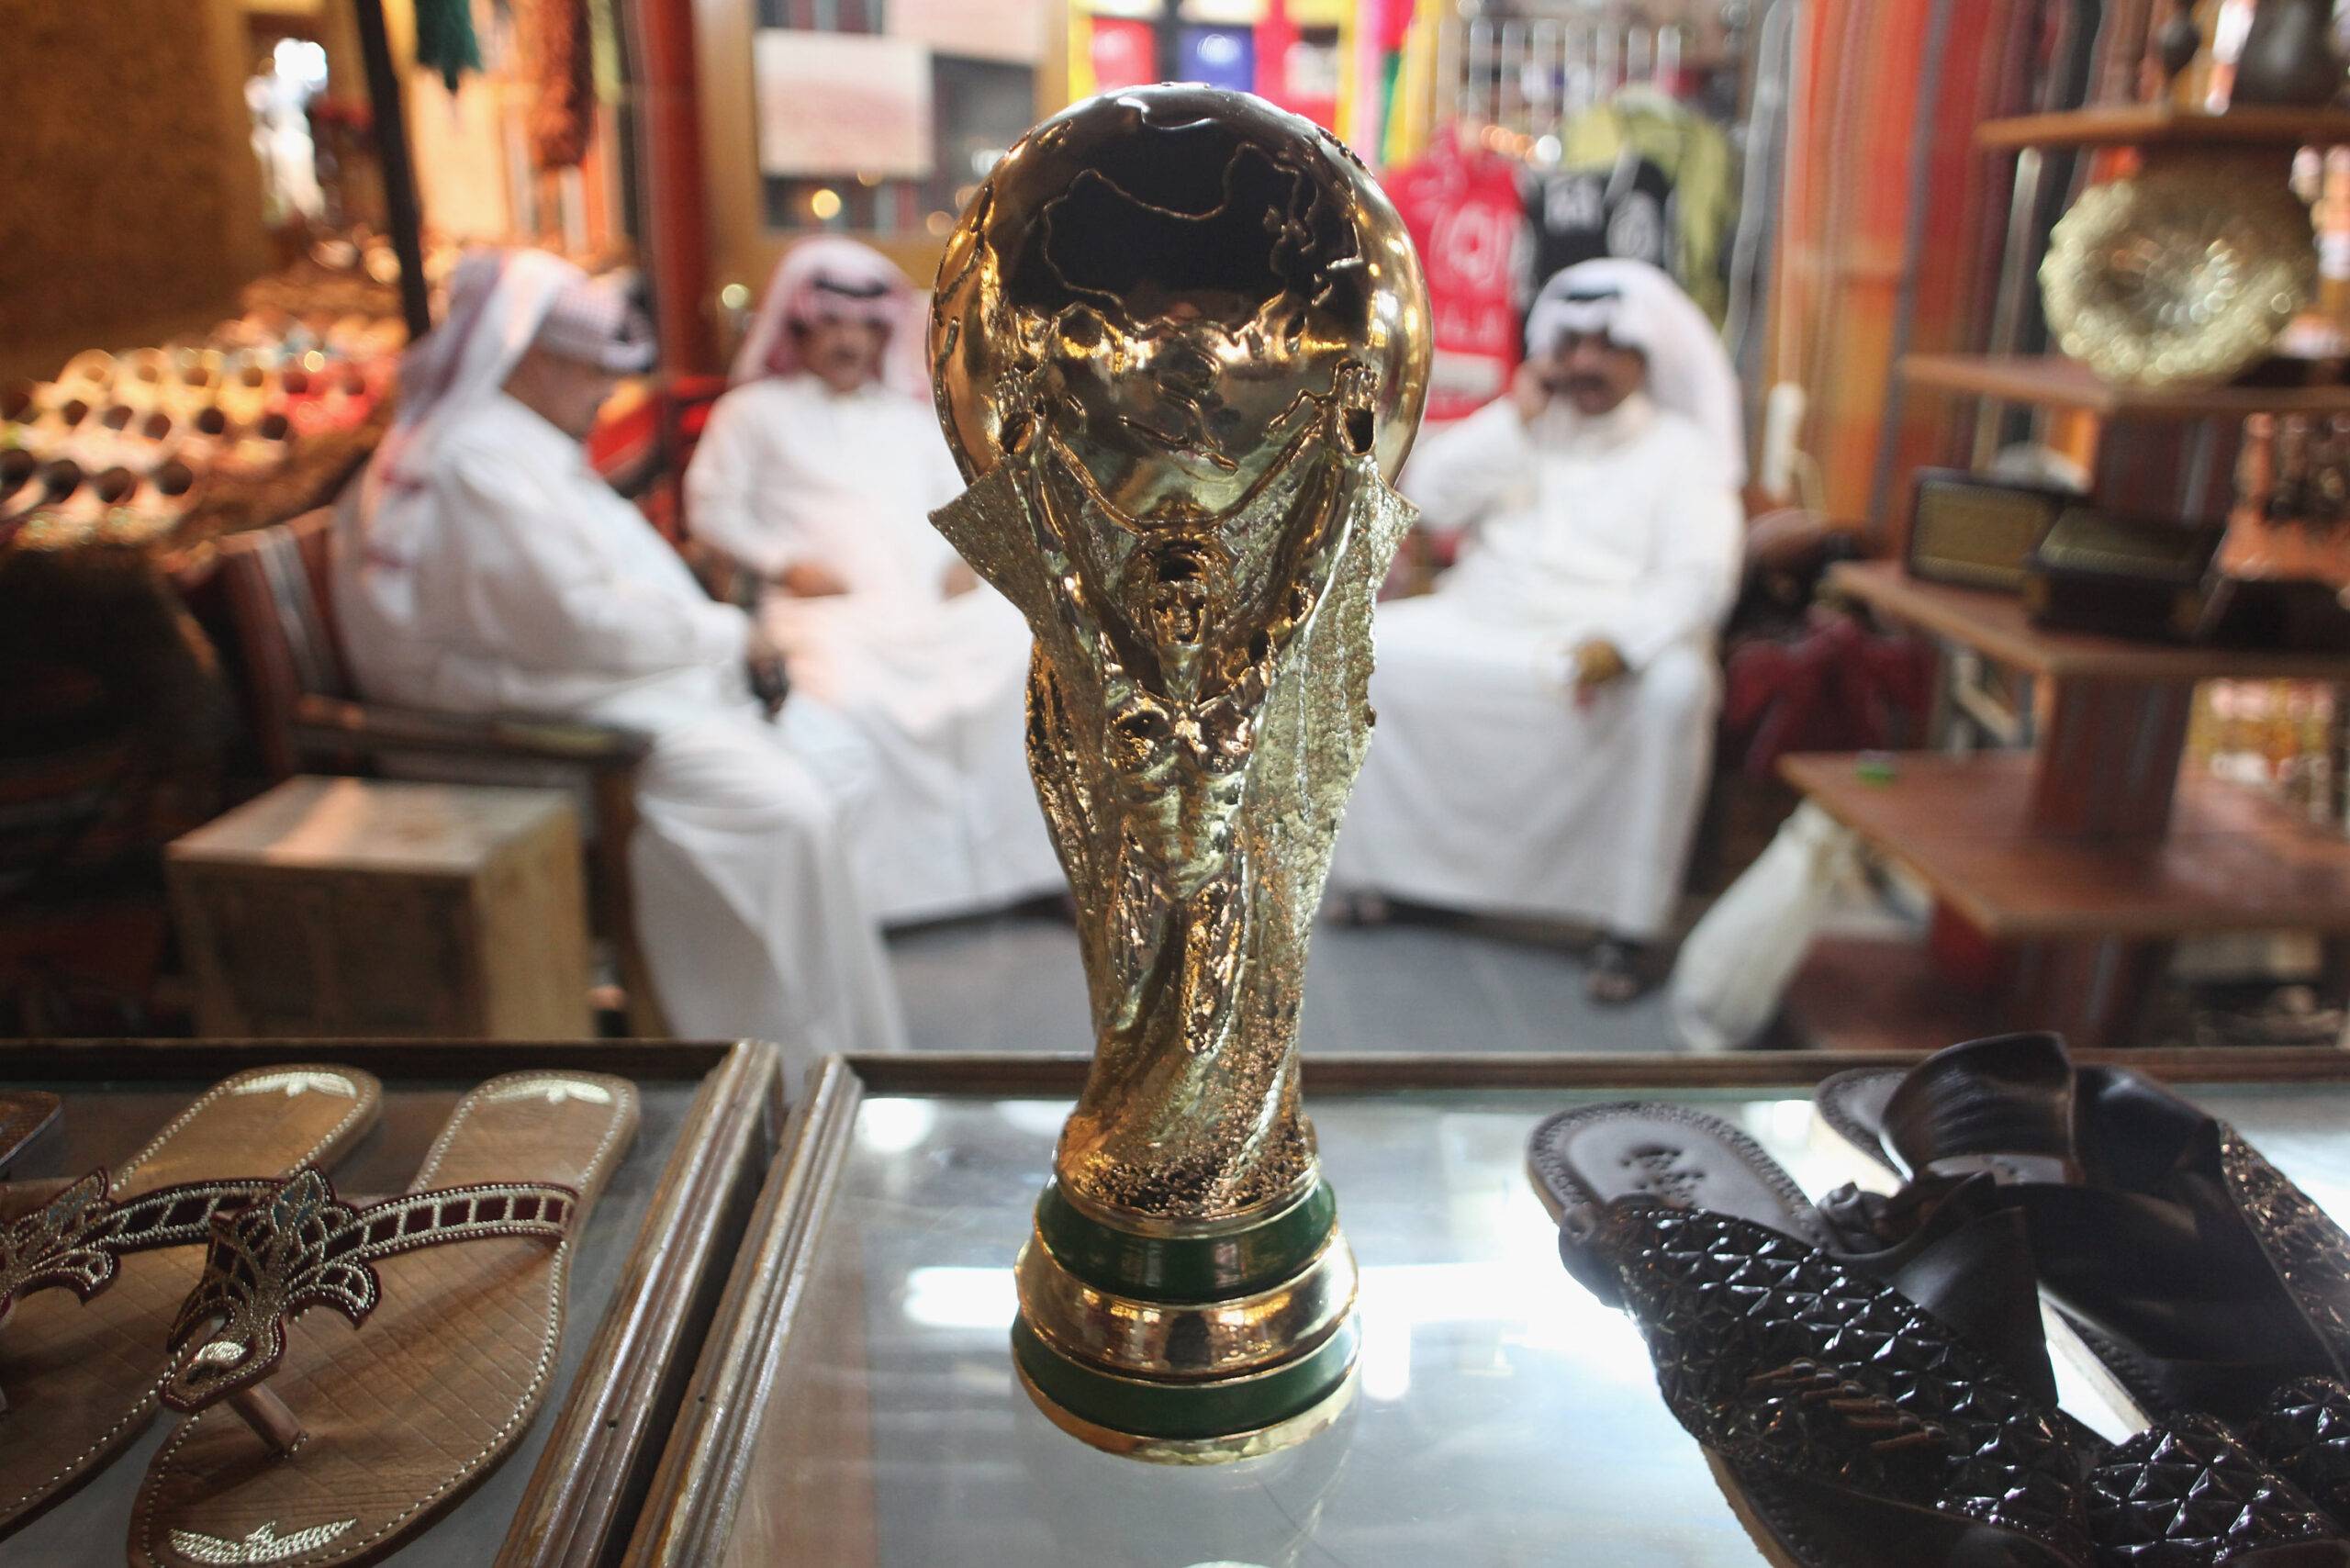 The World Cup trophy on show in Qatar